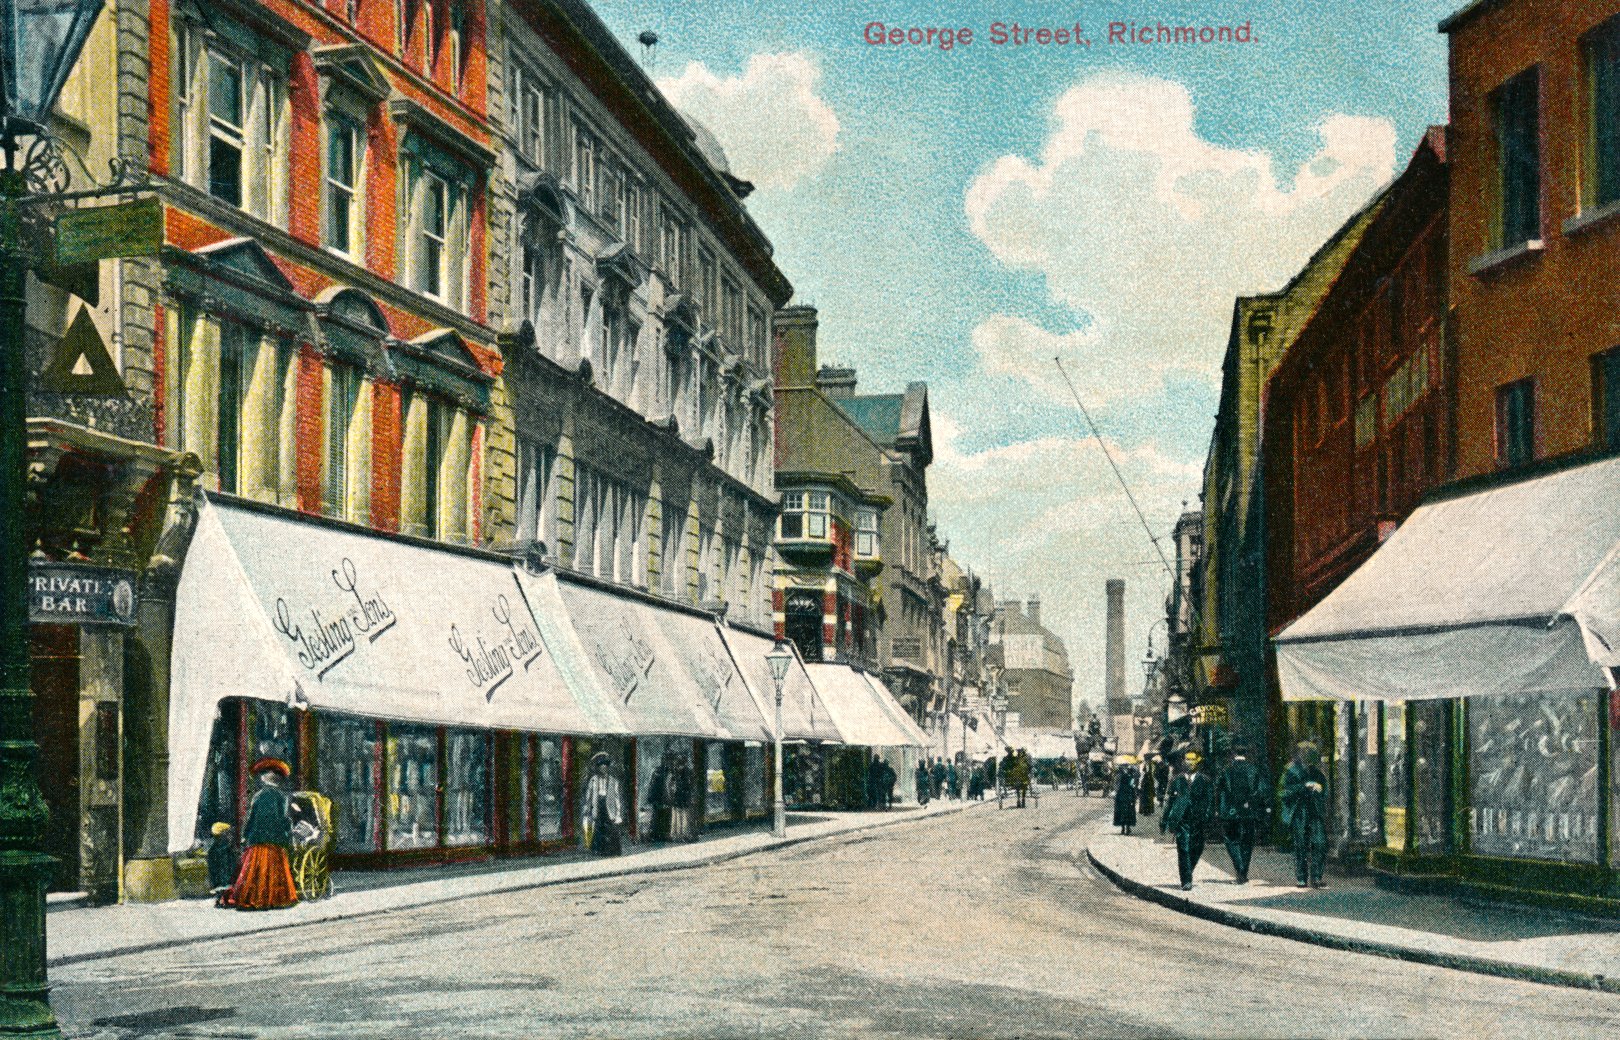 Richmond George Street towards station,hotels and inns Queens Head,street-townscape